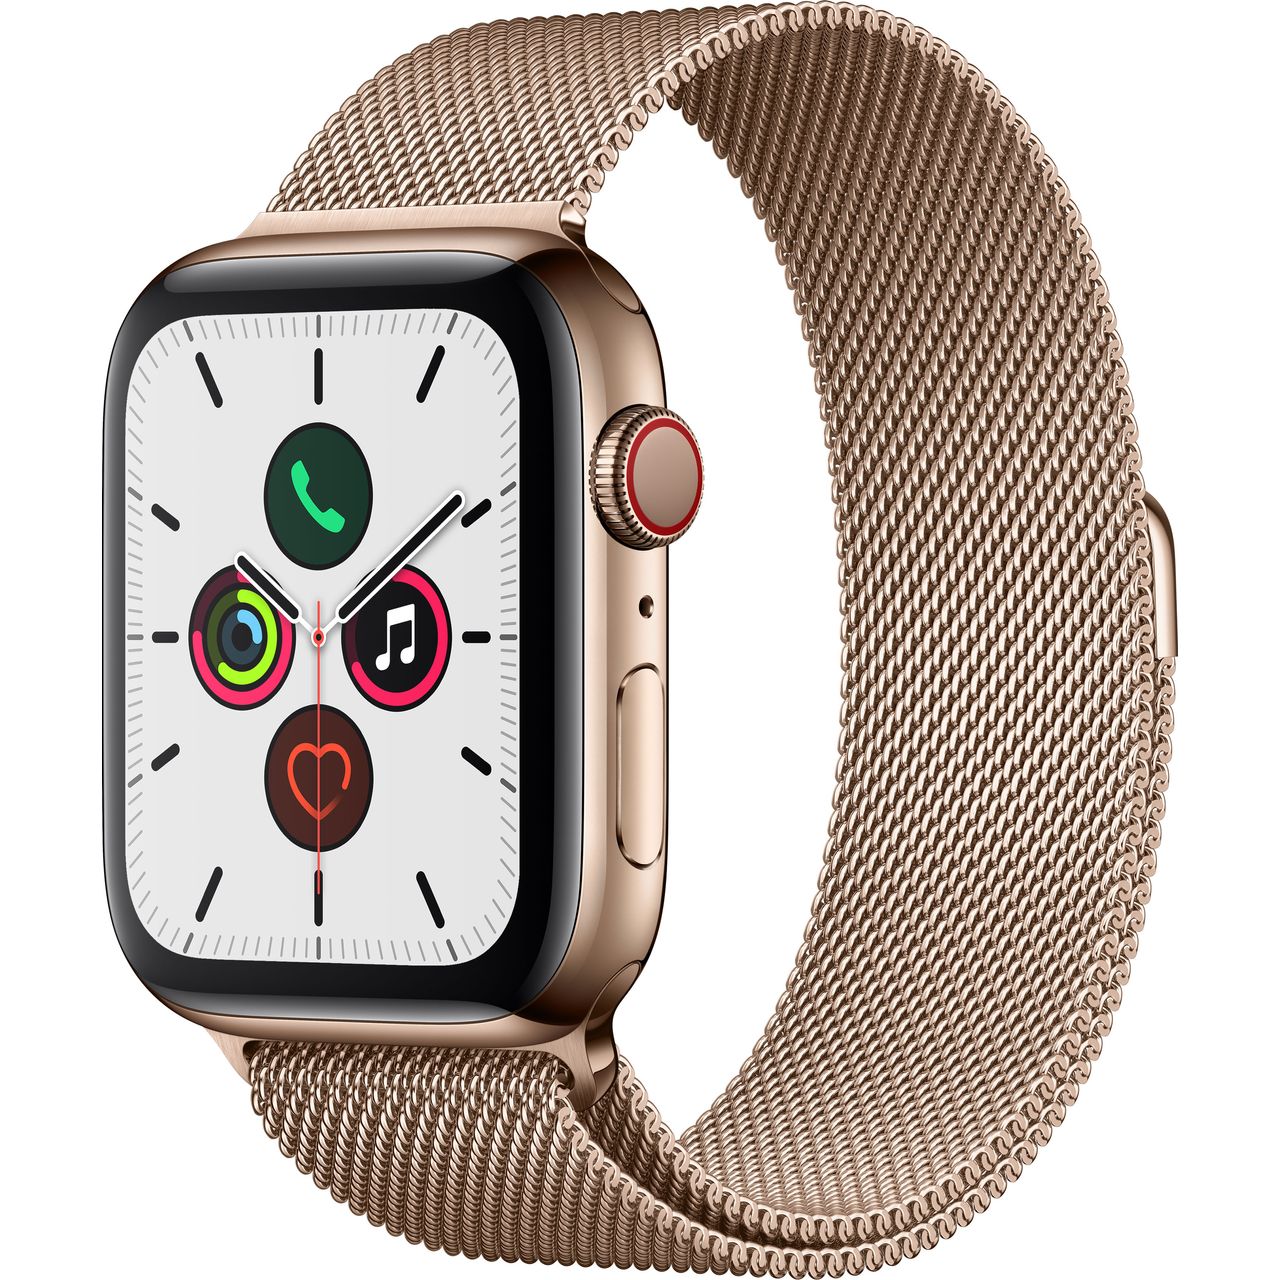 Apple Watch Series 5, 44mm, GPS + Cellular [2019] Review